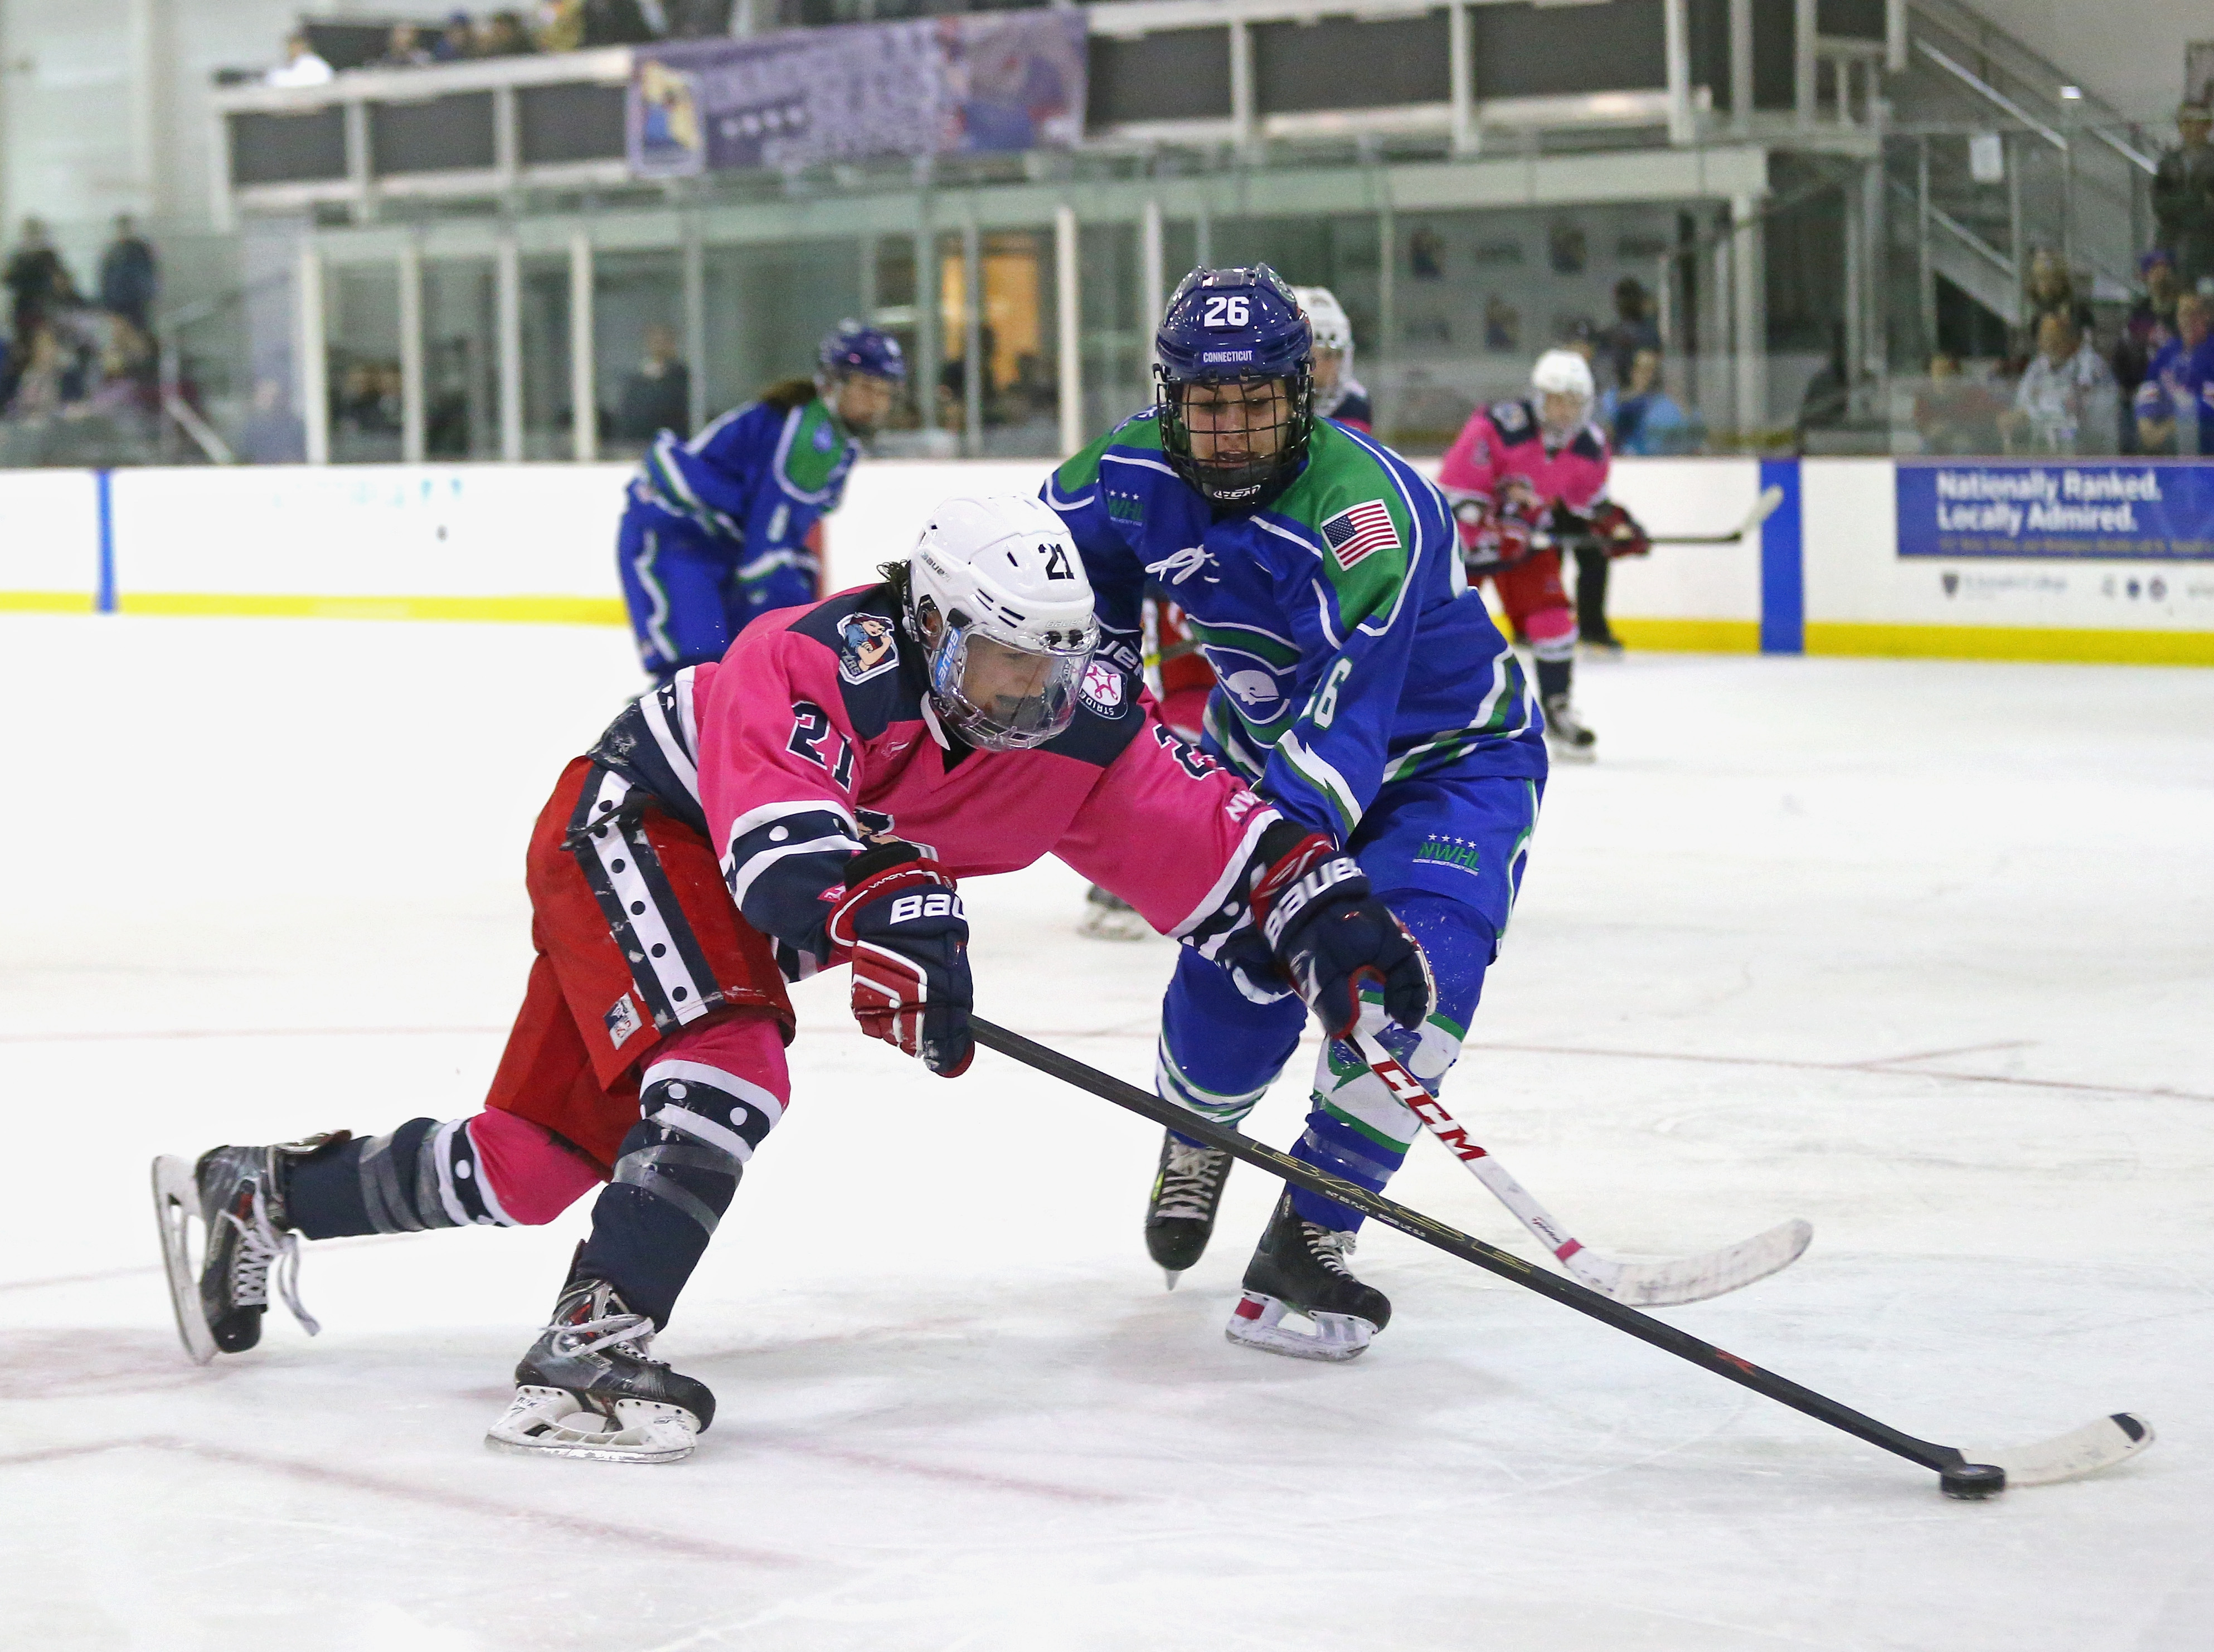 A Day In The Life Of The New York Riveters Women’s Hockey Team